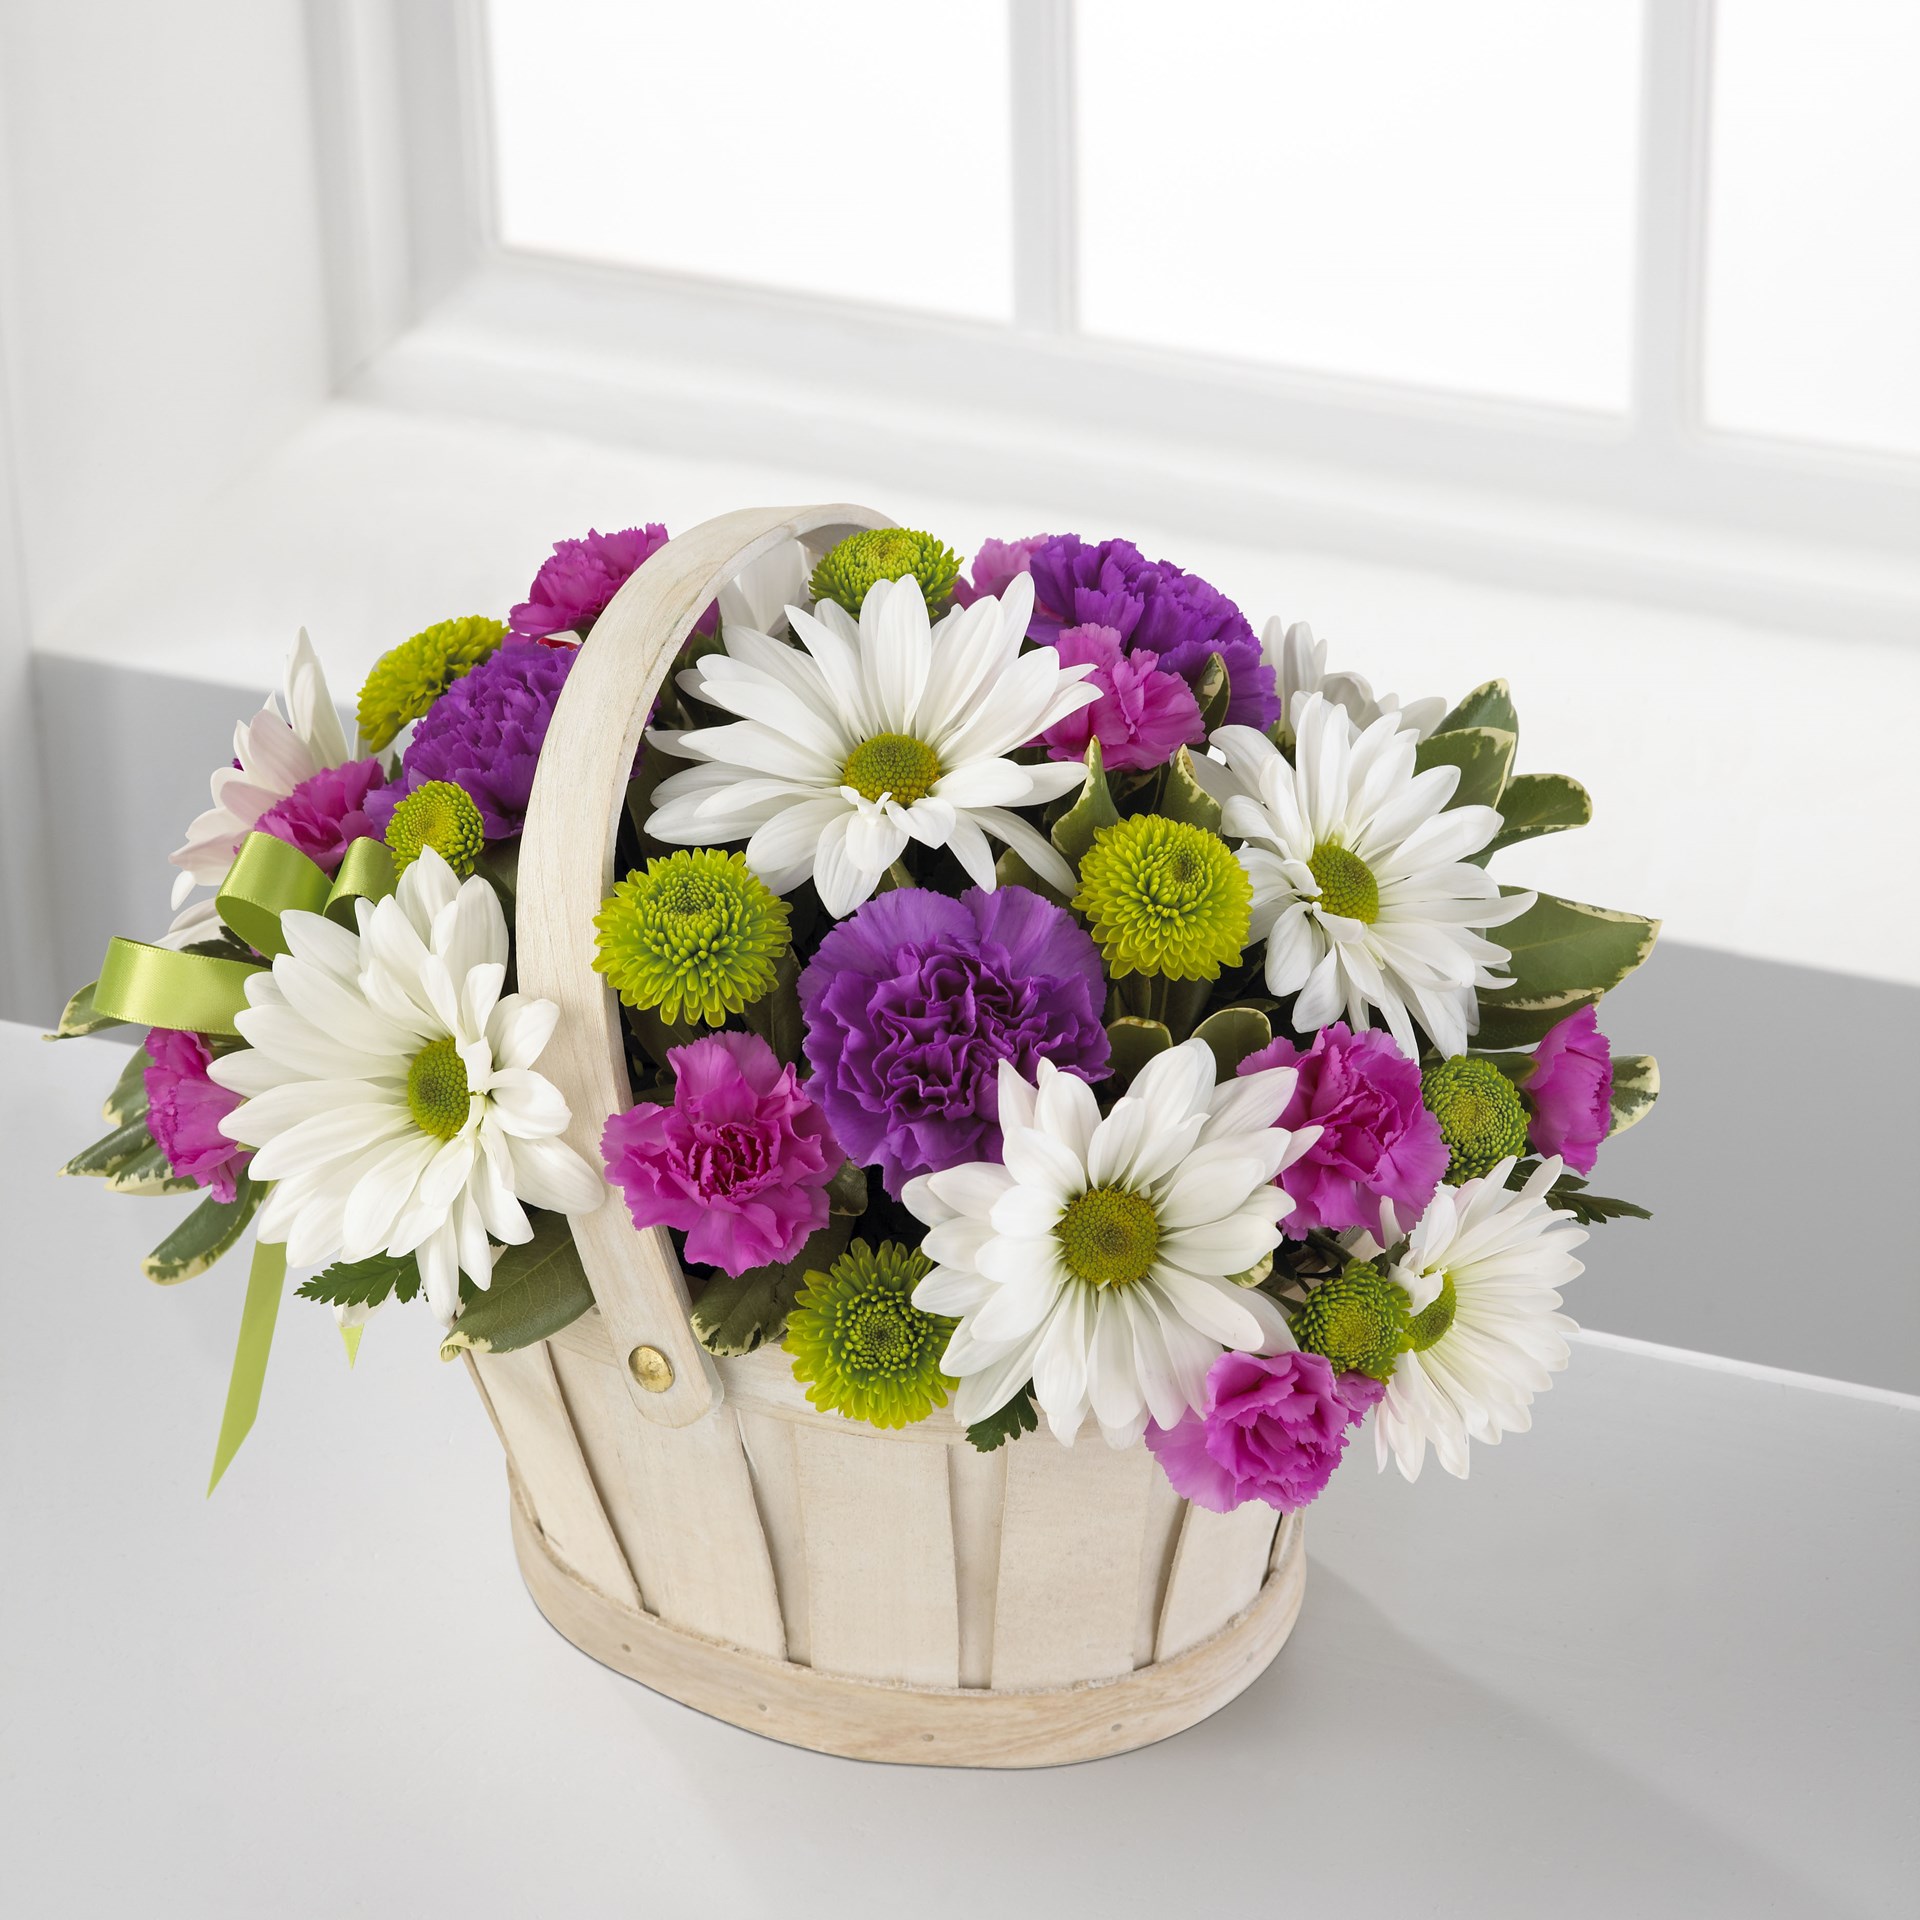 product image for Blooming Bounty Bouquet - Basket Included